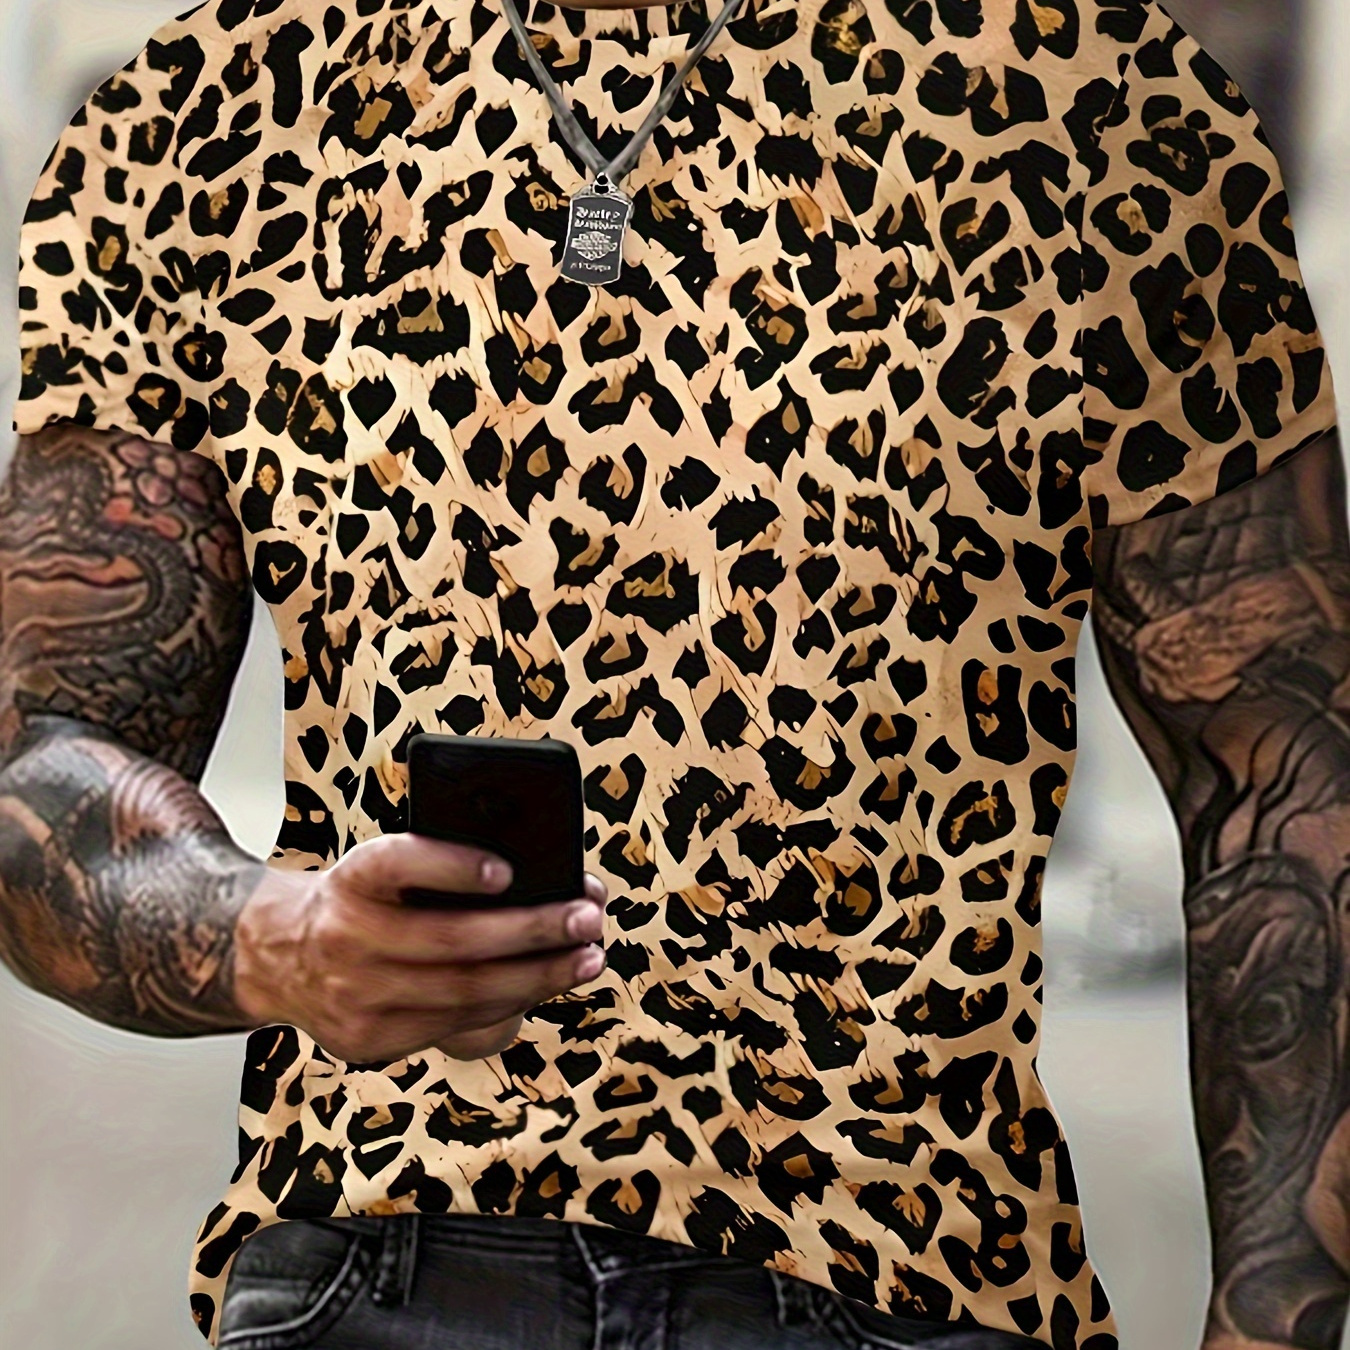 

Leopard Pattern 3d Printed Crew Neck Short Sleeve T-shirt For Men, Casual Summer T-shirt For Daily Wear And Vacation Resorts